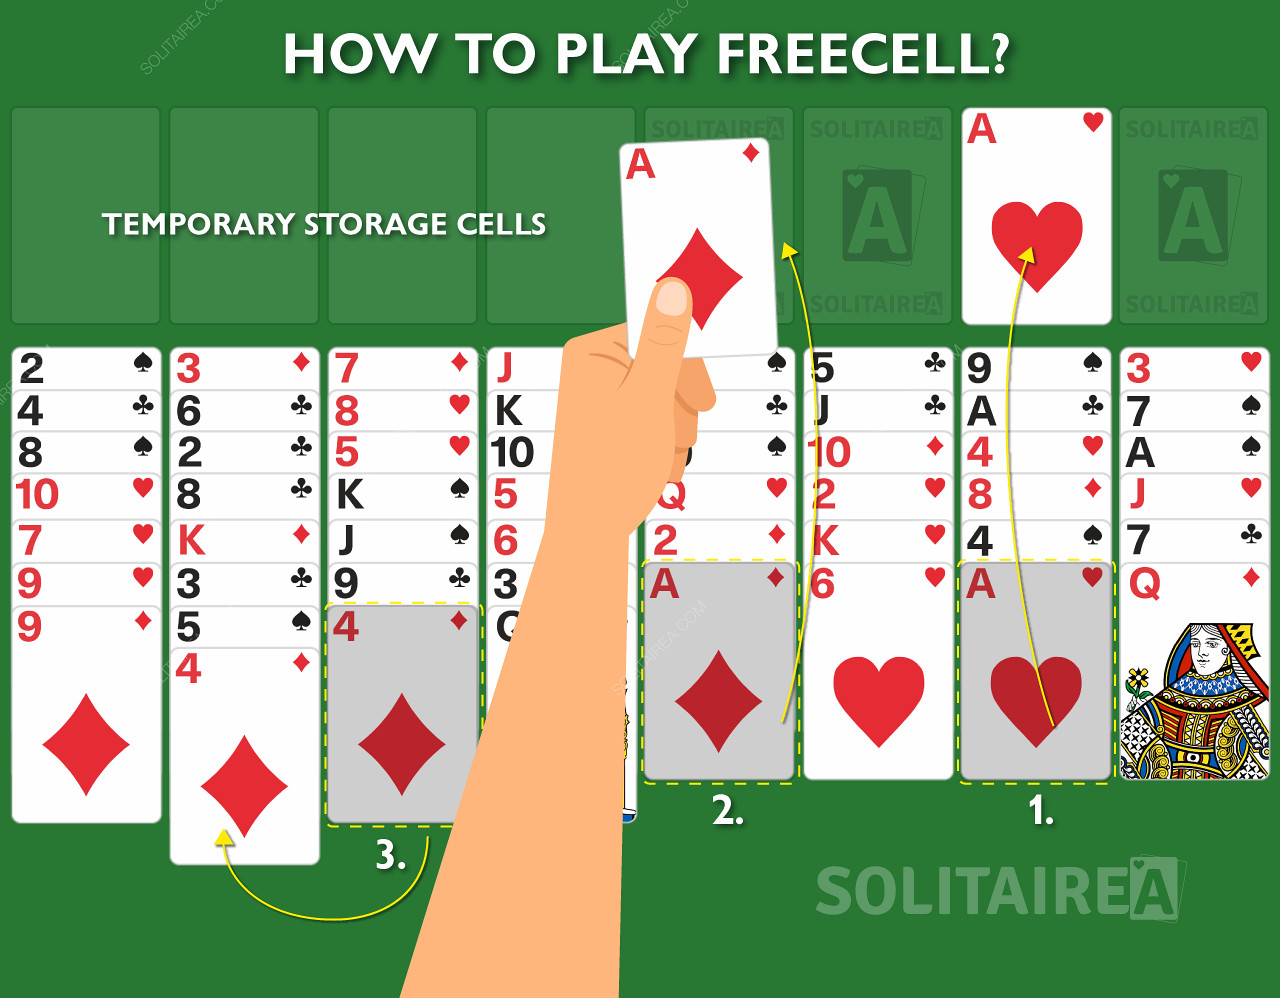 So funktioniert FreeCell Solitaire